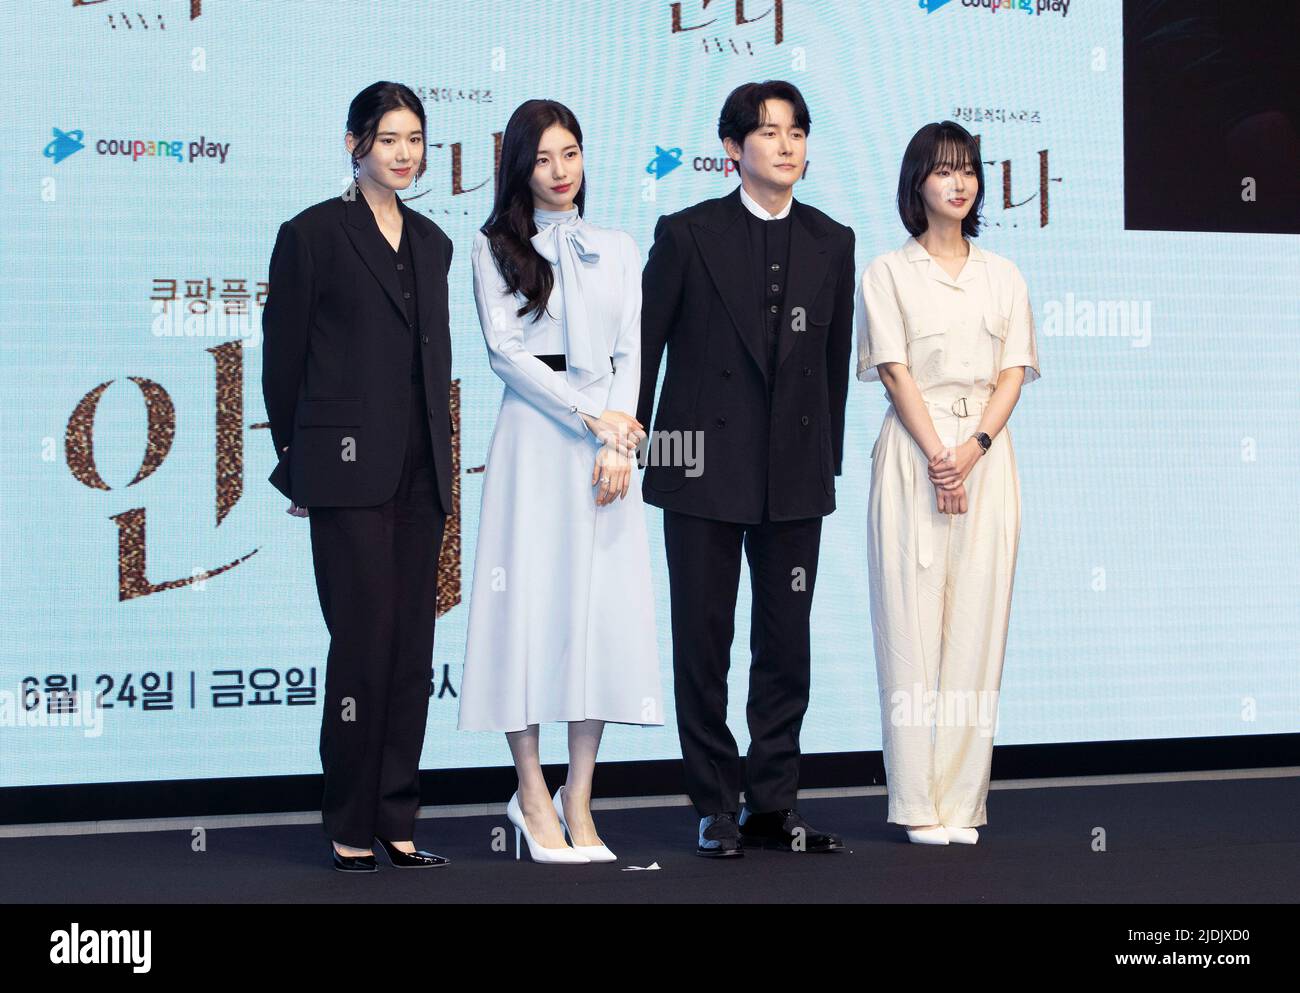 Seoul, South Korea. 21st June, 2022. (L to R) Actors Jung Eun-chae, Bae Su-ji, Kim Jun-han and Park Ye-young, pose for photos during a press conference to promote the Coupangplay Series film 'Anna' in Seoul, South Korea on June 21, 2022. The movie is to be released in South Korea on June 24. (Photo by Lee Young-ho/Sipa USA) Credit: Sipa USA/Alamy Live News Stock Photo